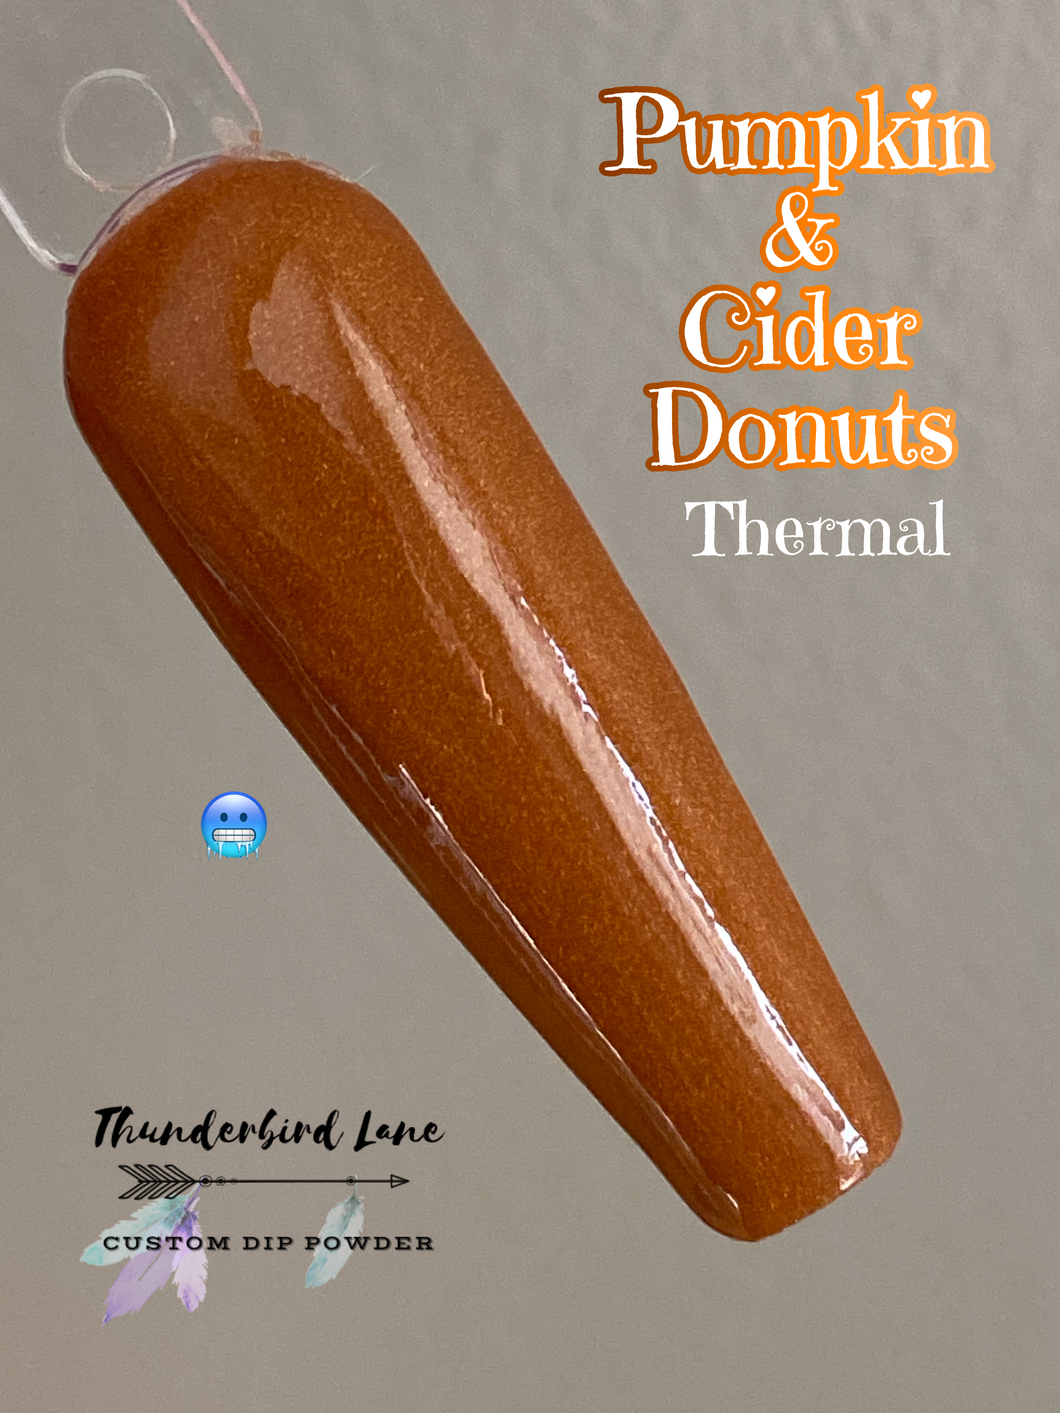 Pumpkin and Cider Donuts Thermal